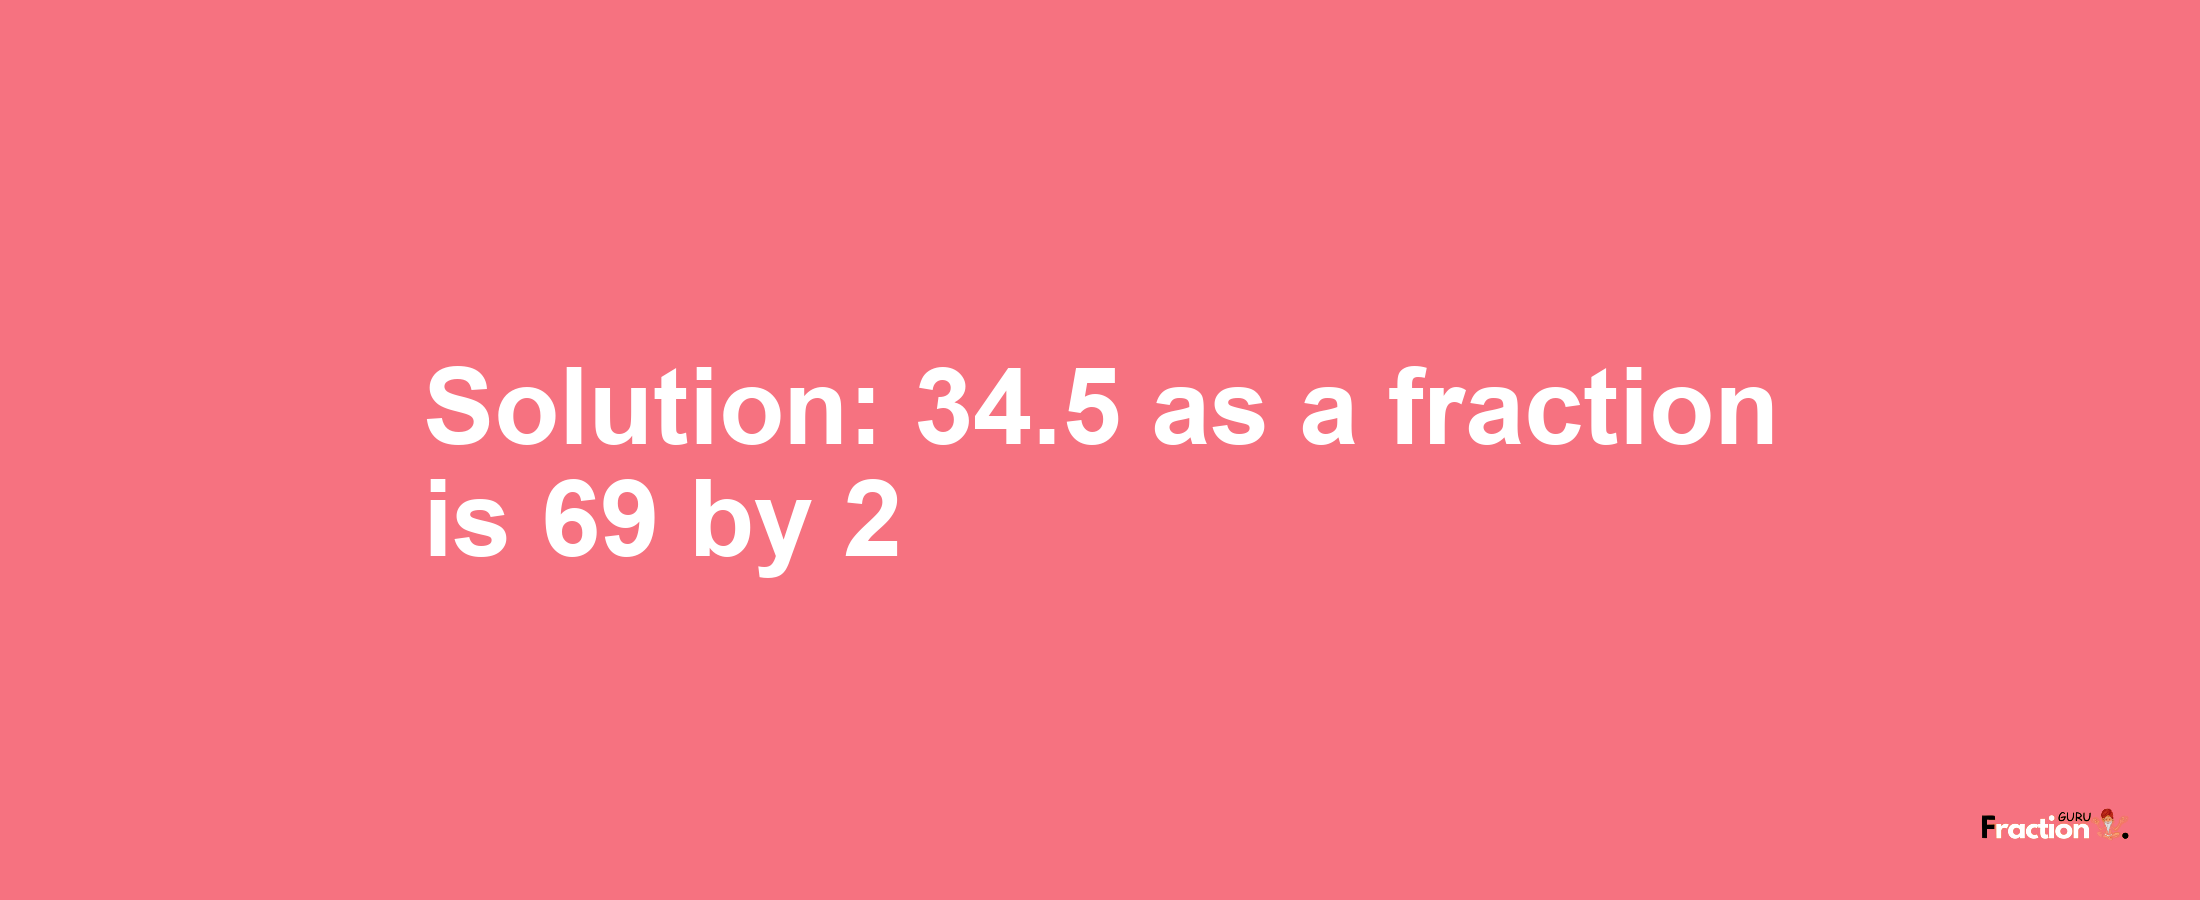 Solution:34.5 as a fraction is 69/2